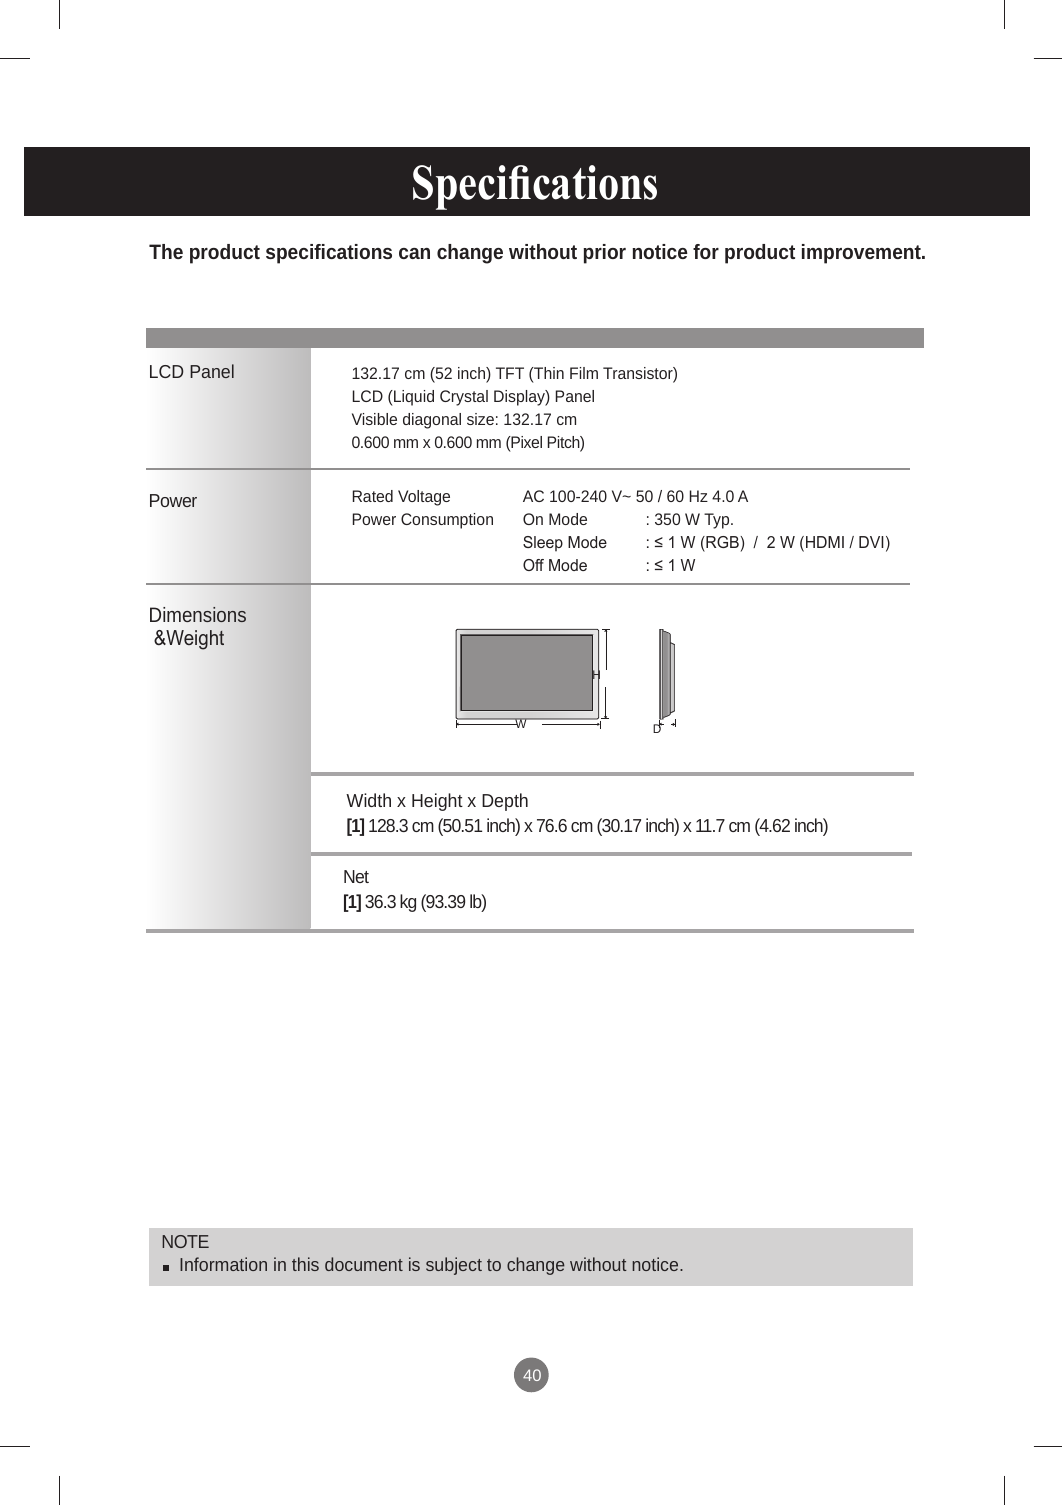 40The product specifications can change without prior notice for product improvement. Specications      LCD PanelPower Dimensions &amp;WeightNOTE  Information in this document is subject to change without notice.132.17 cm (52 inch) TFT (Thin Film Transistor) LCD (Liquid Crystal Display) PanelVisible diagonal size: 132.17 cm0.600 mm x 0.600 mm (Pixel Pitch)Rated Voltage   AC 100-240 V~ 50 / 60 Hz 4.0 APower Consumption  On Mode  : 350 W Typ.   Sleep Mode  : ≤ 1 W (RGB)  /  2 W (HDMI / DVI)   Off Mode  : ≤ 1 W WHDNet   [1] 36.3 kg (93.39 lb)Width x Height x Depth  [1] 128.3 cm (50.51 inch) x 76.6 cm (30.17 inch) x 11.7 cm (4.62 inch)